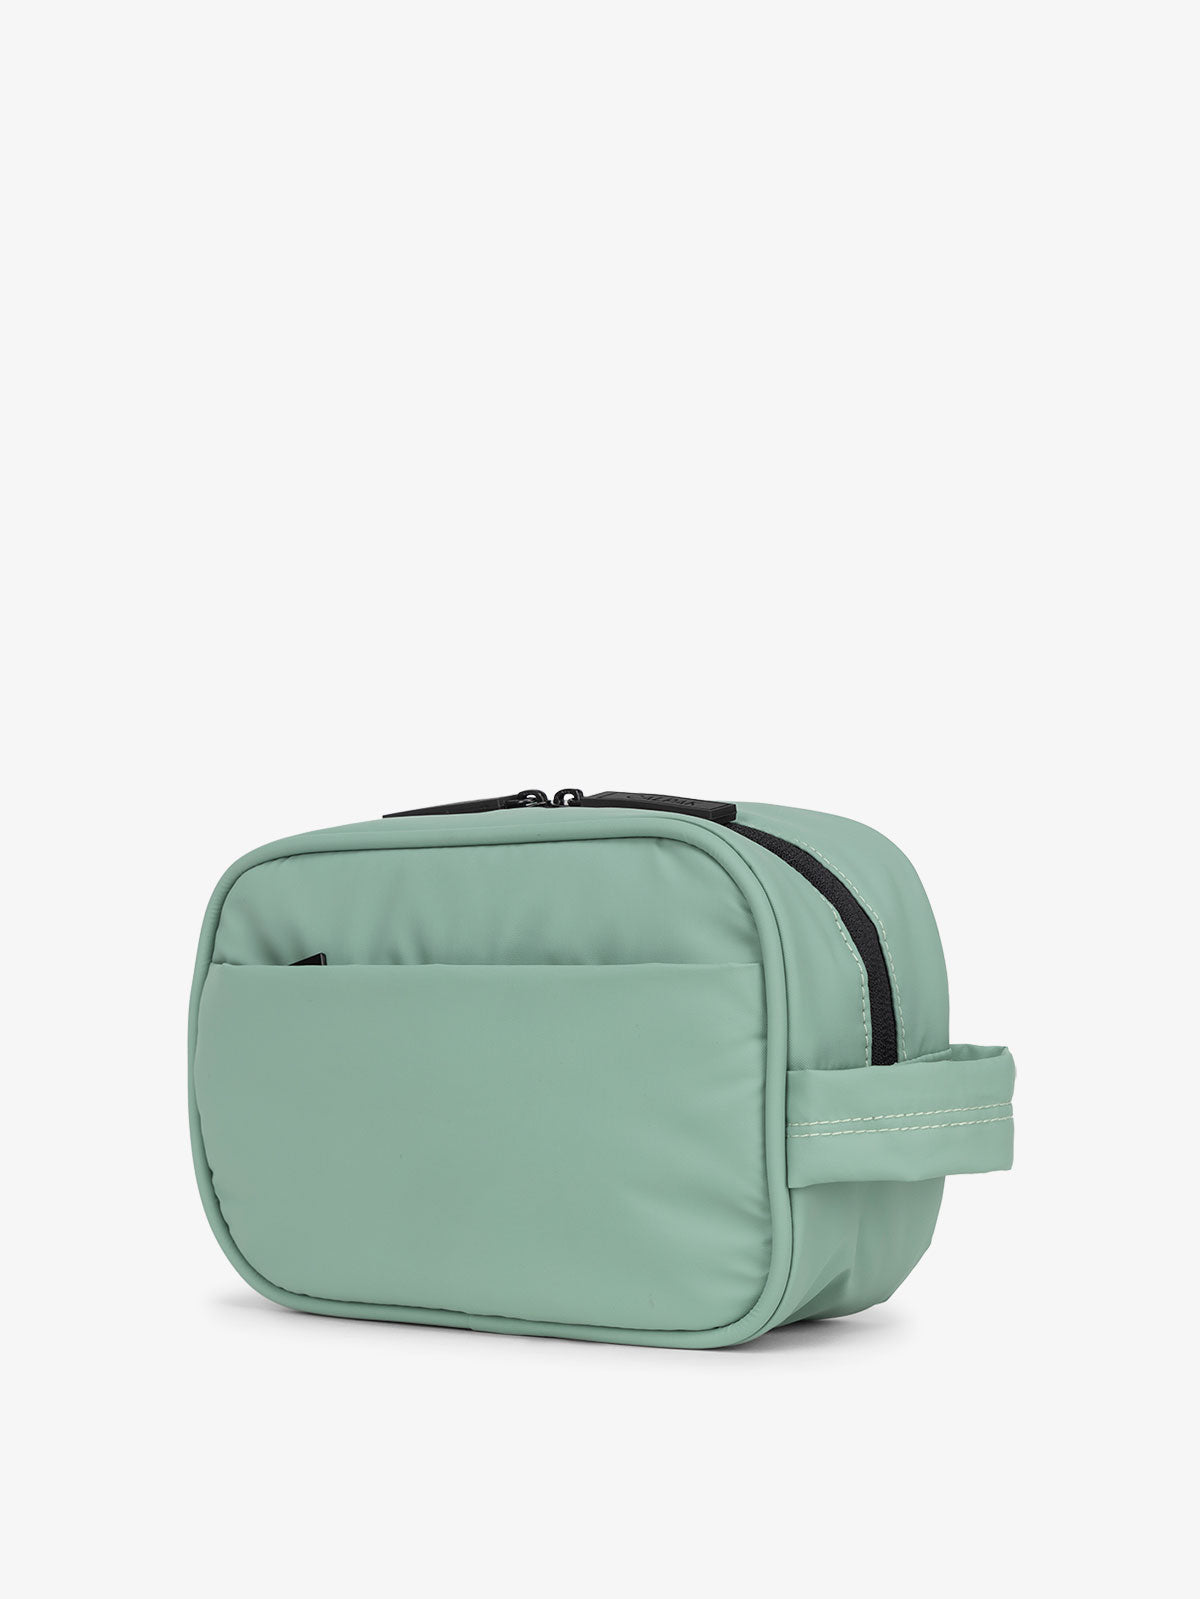 CALPAK Luka Toiletry Bag for travel organization with soft puffy exterior and multiple pockets in green